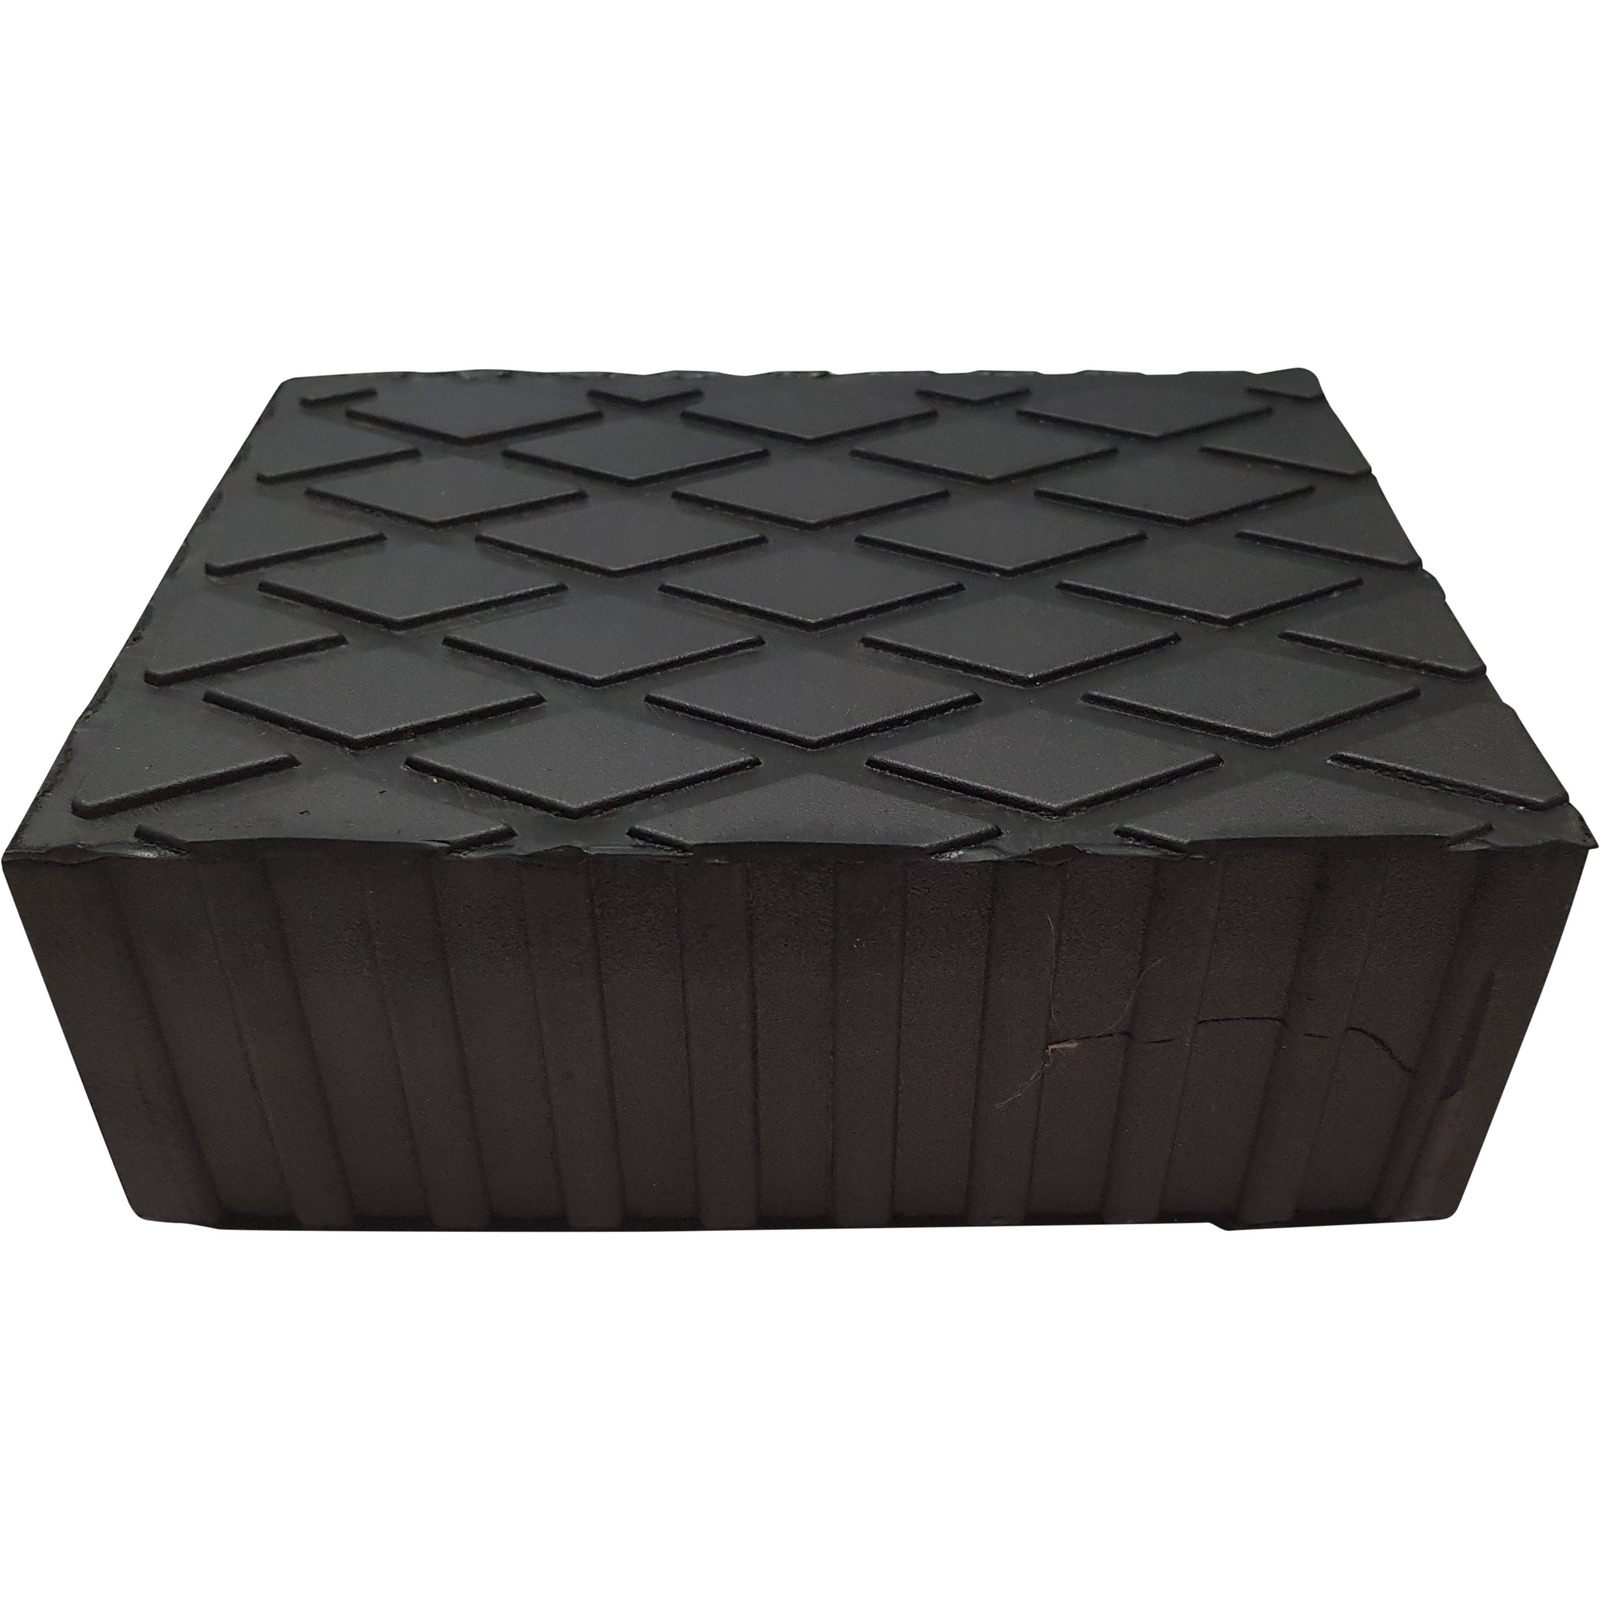 1 x Rubber Load Pad/Rubber Block 60mm Thick For Use With Hoist & Scissor Lifts